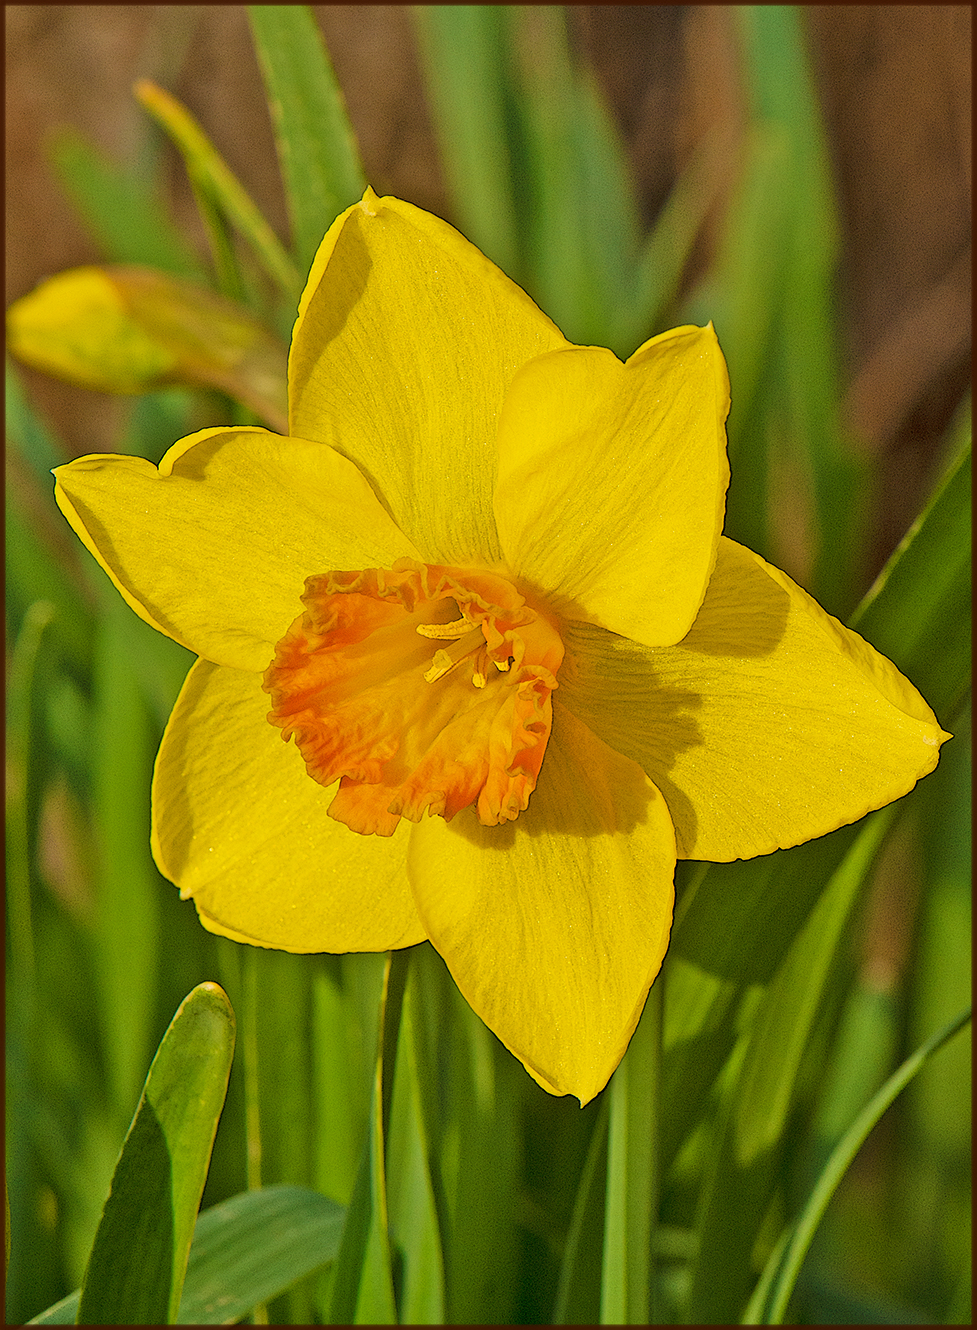 daffodil with orange center at 3 Dog Acres on 25 March 2022